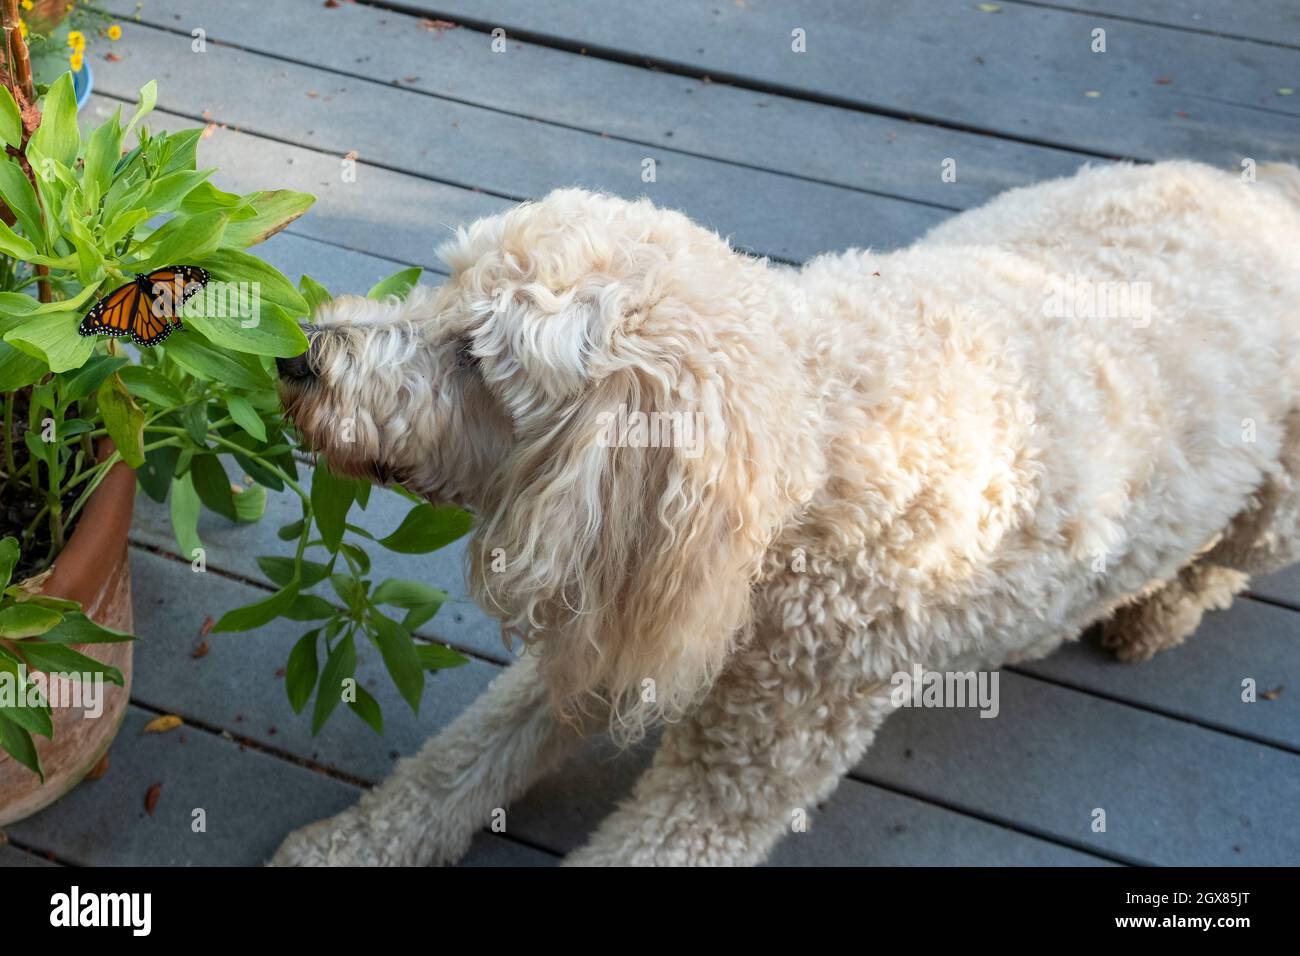 Sweet blonde Goldendoodle dog gets as close as she can to a new garden friend, a newly hatched female Wester Monarch Butterfly in California garden Stock Photo